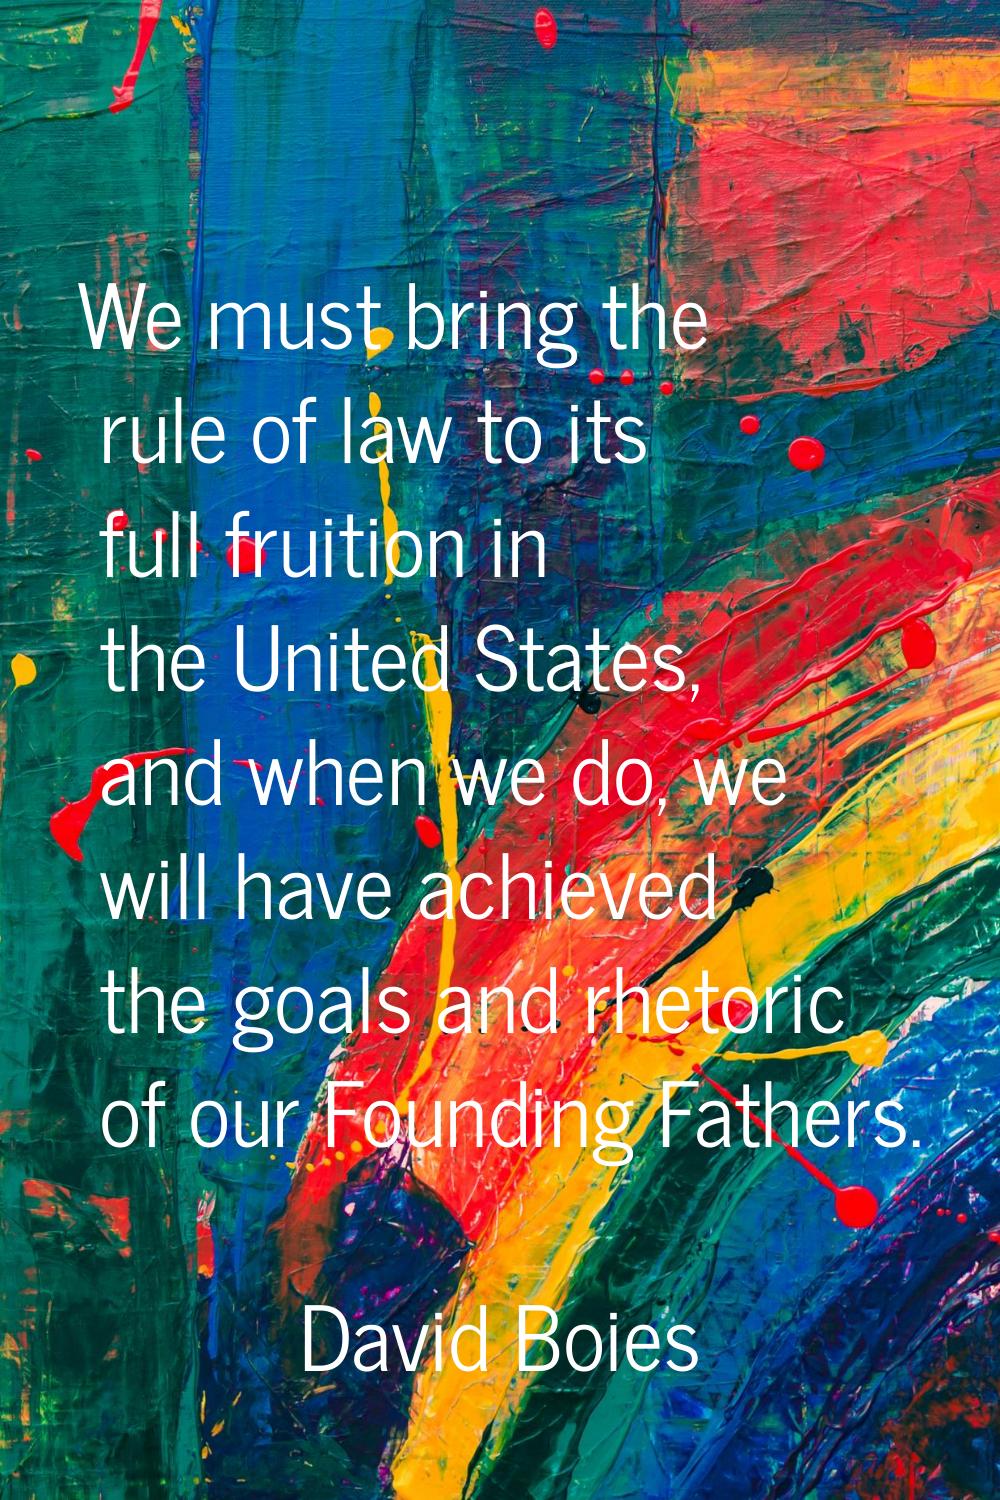 We must bring the rule of law to its full fruition in the United States, and when we do, we will ha